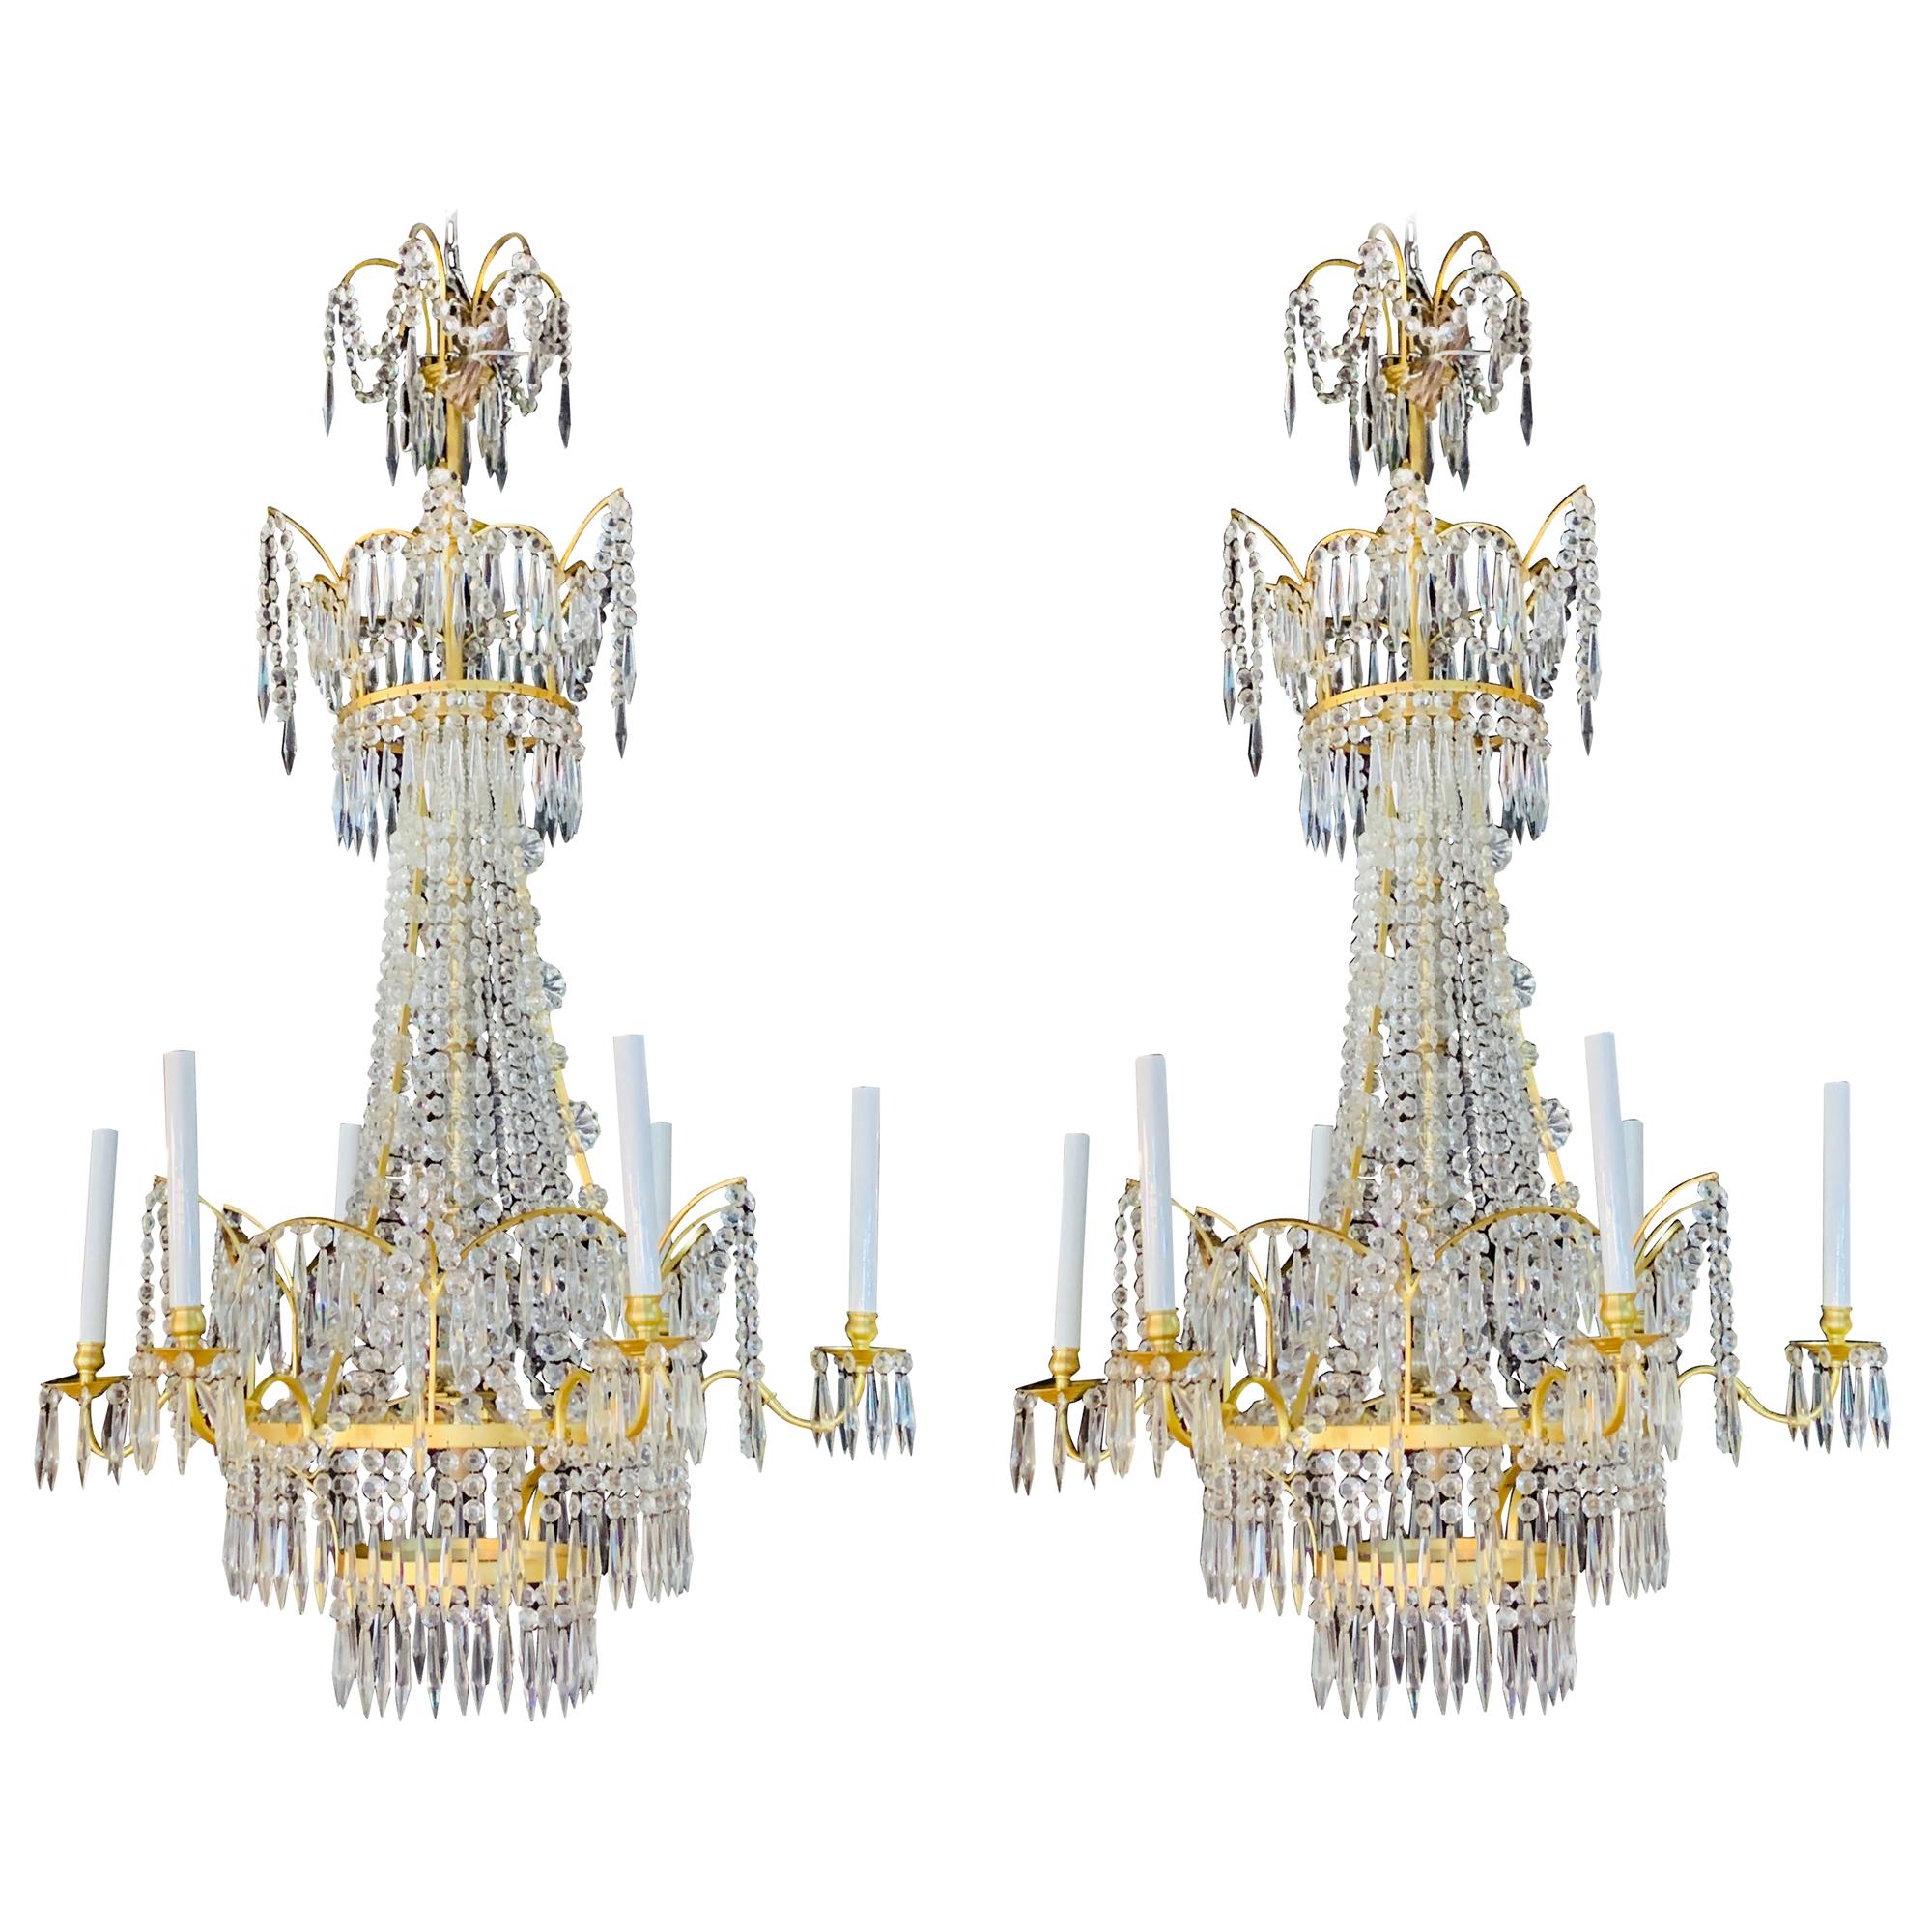 Pair of Russian Neoclassical Style Bronze and Crystal 7-Light Chandeliers